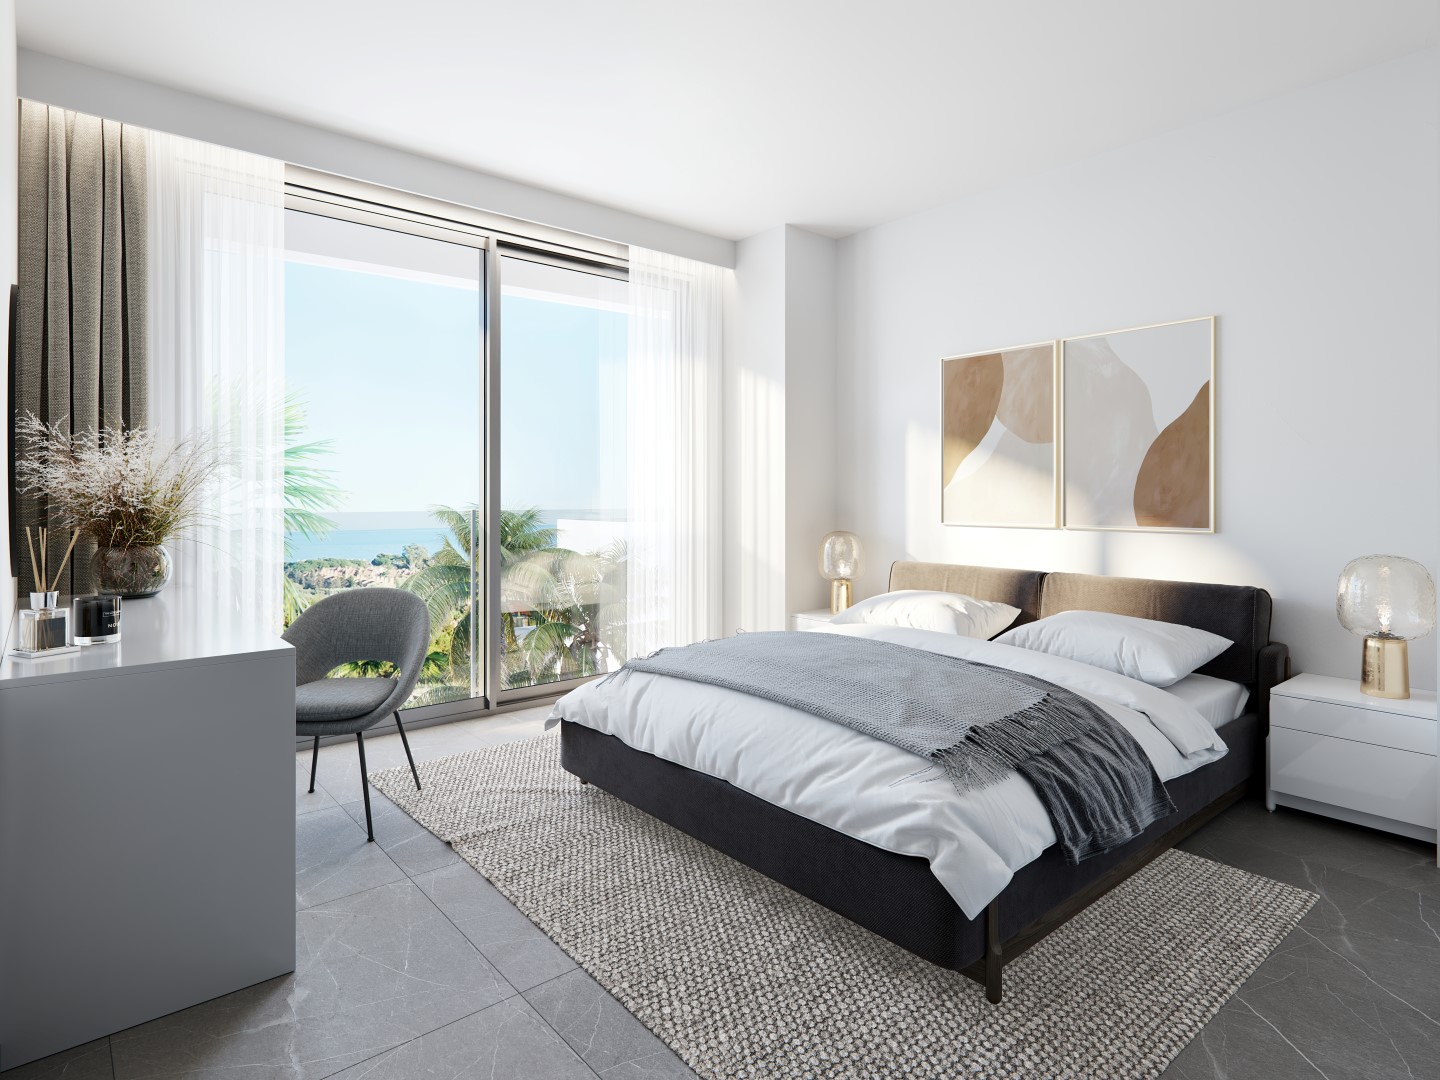 Geräumiges Luxus-Penthouse in Marbella!